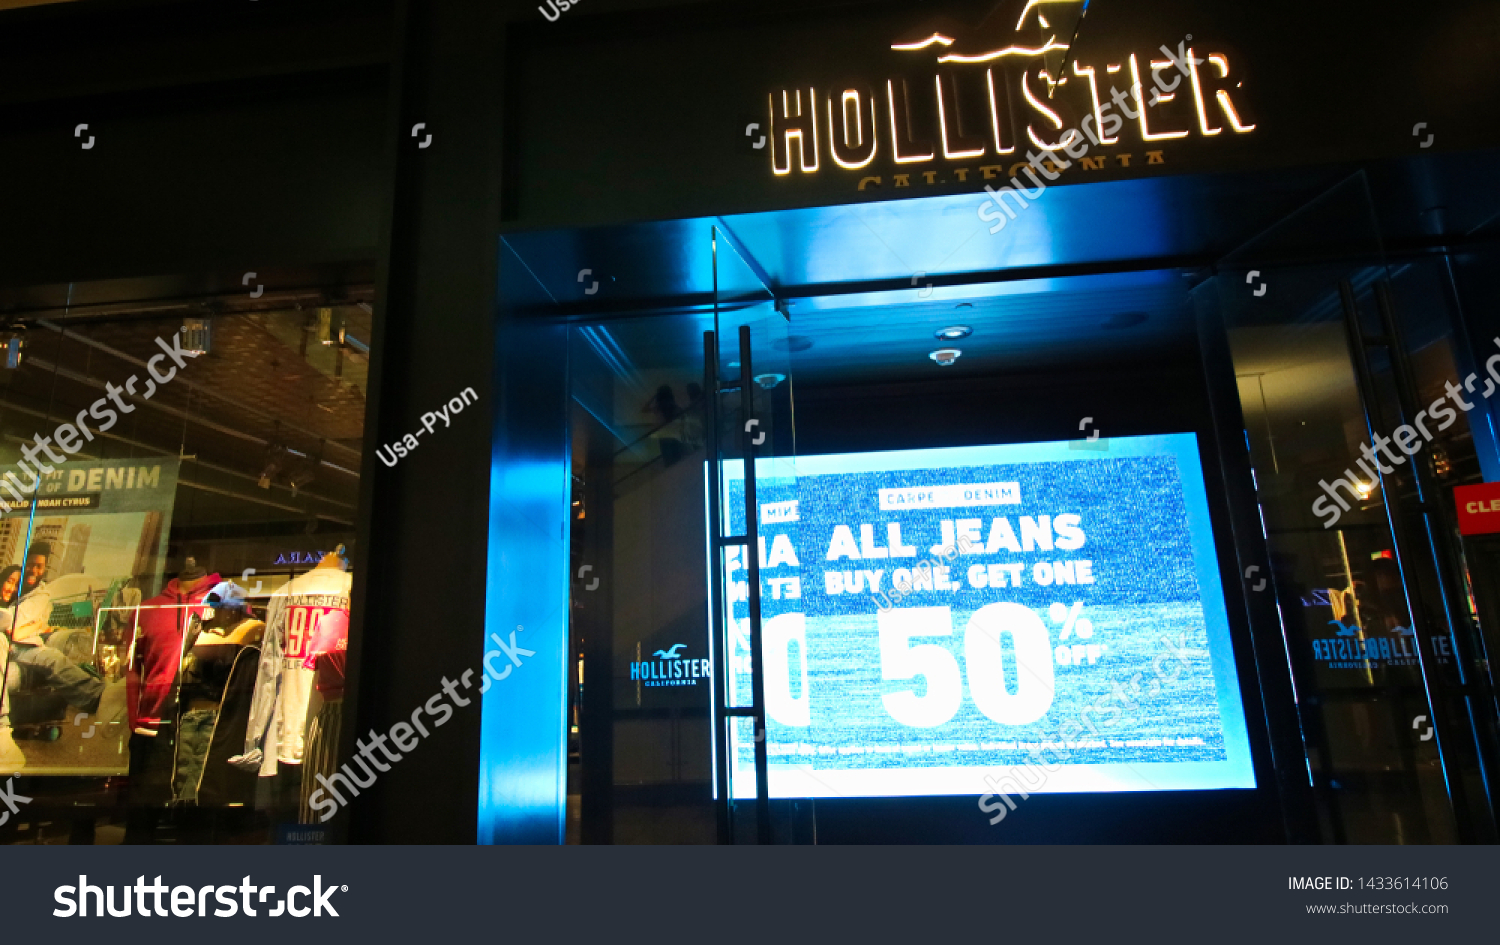 hollister mall of asia